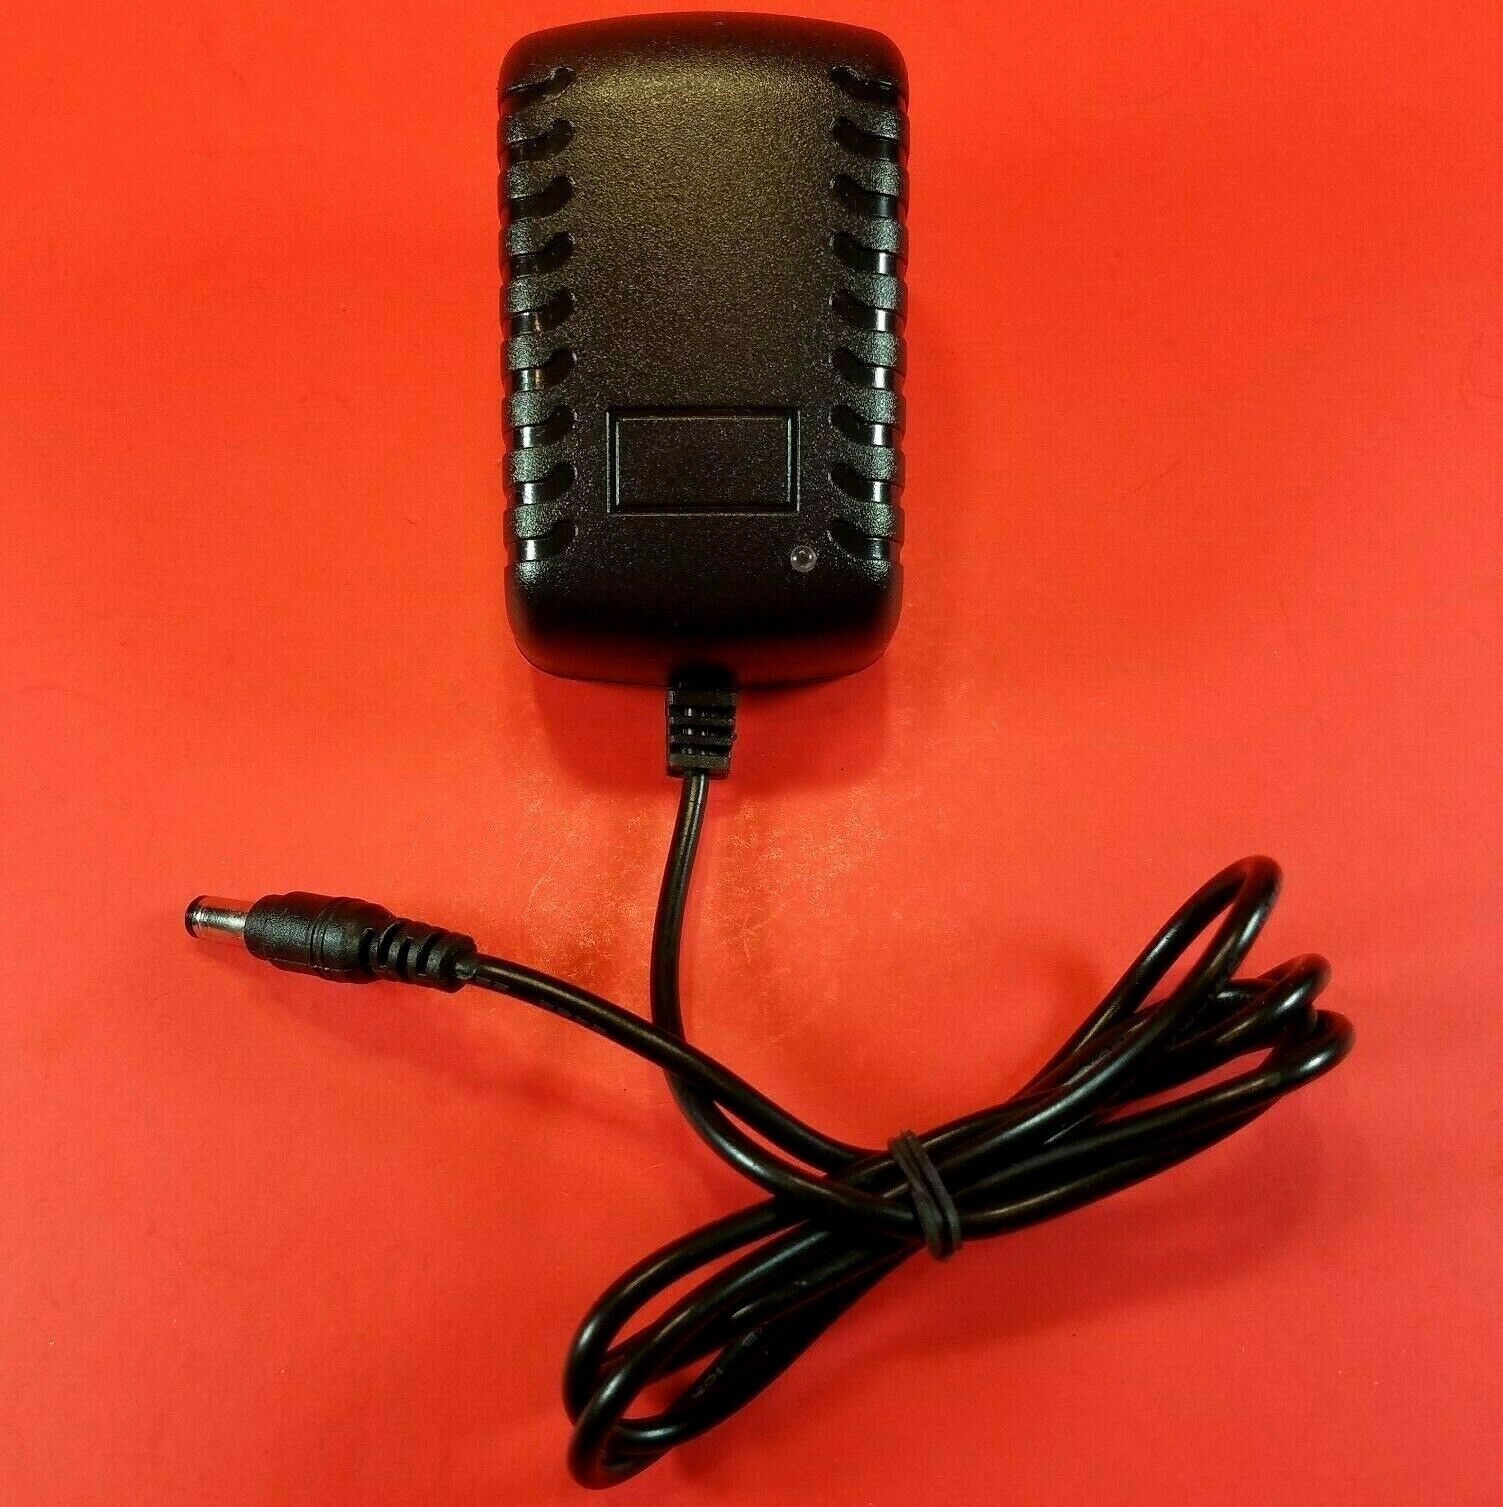 GENUINE SONY AC POWER ADAPTER AC-930A OUTPUT DC 9V 600MA Type: AC/AC Adapter Output Voltage: 9 V Features: Powered Br